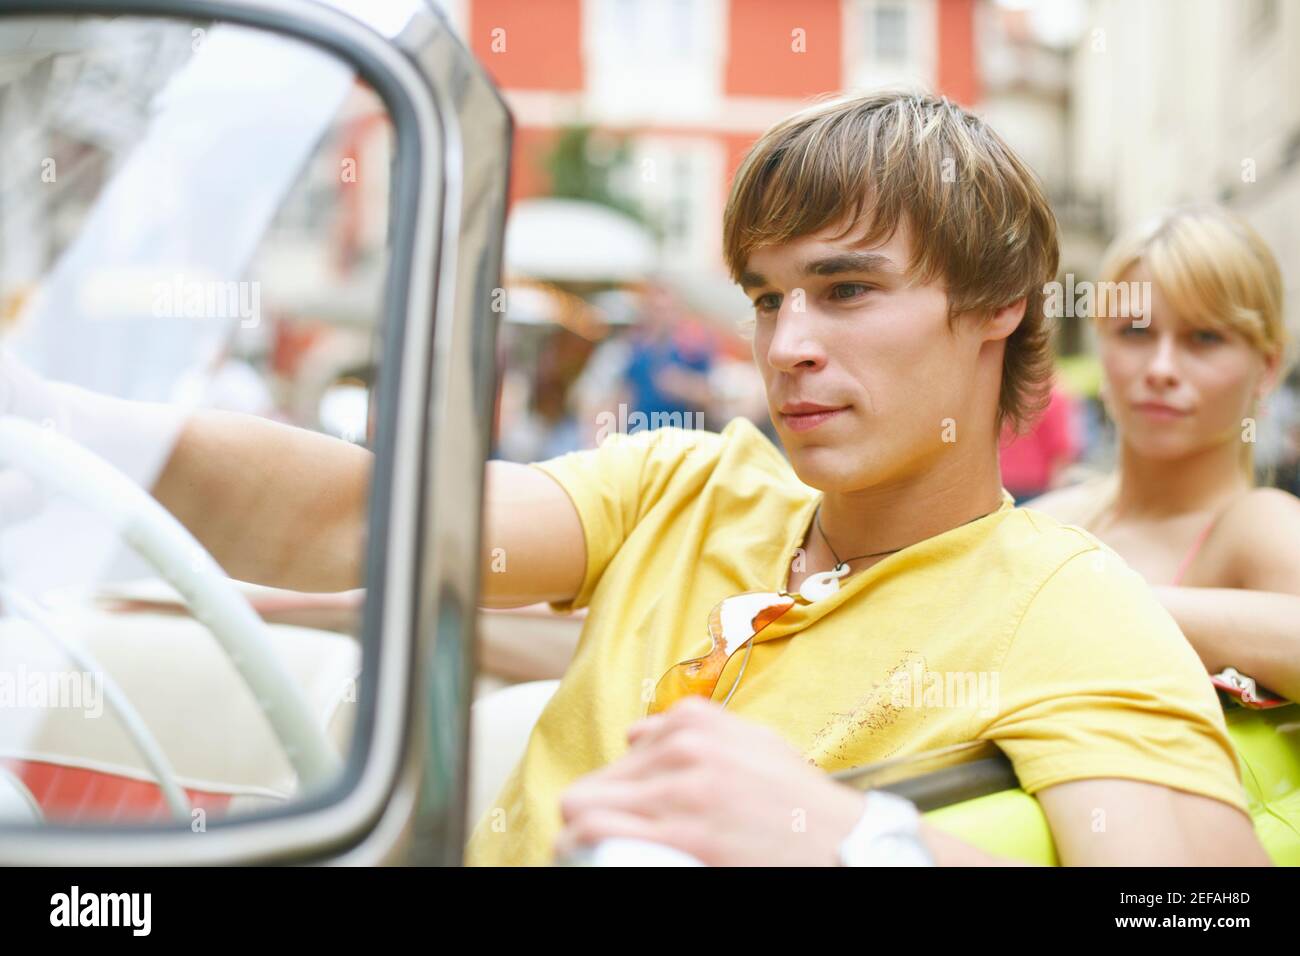 Close-up of a young man sitting in a car Banque D'Images